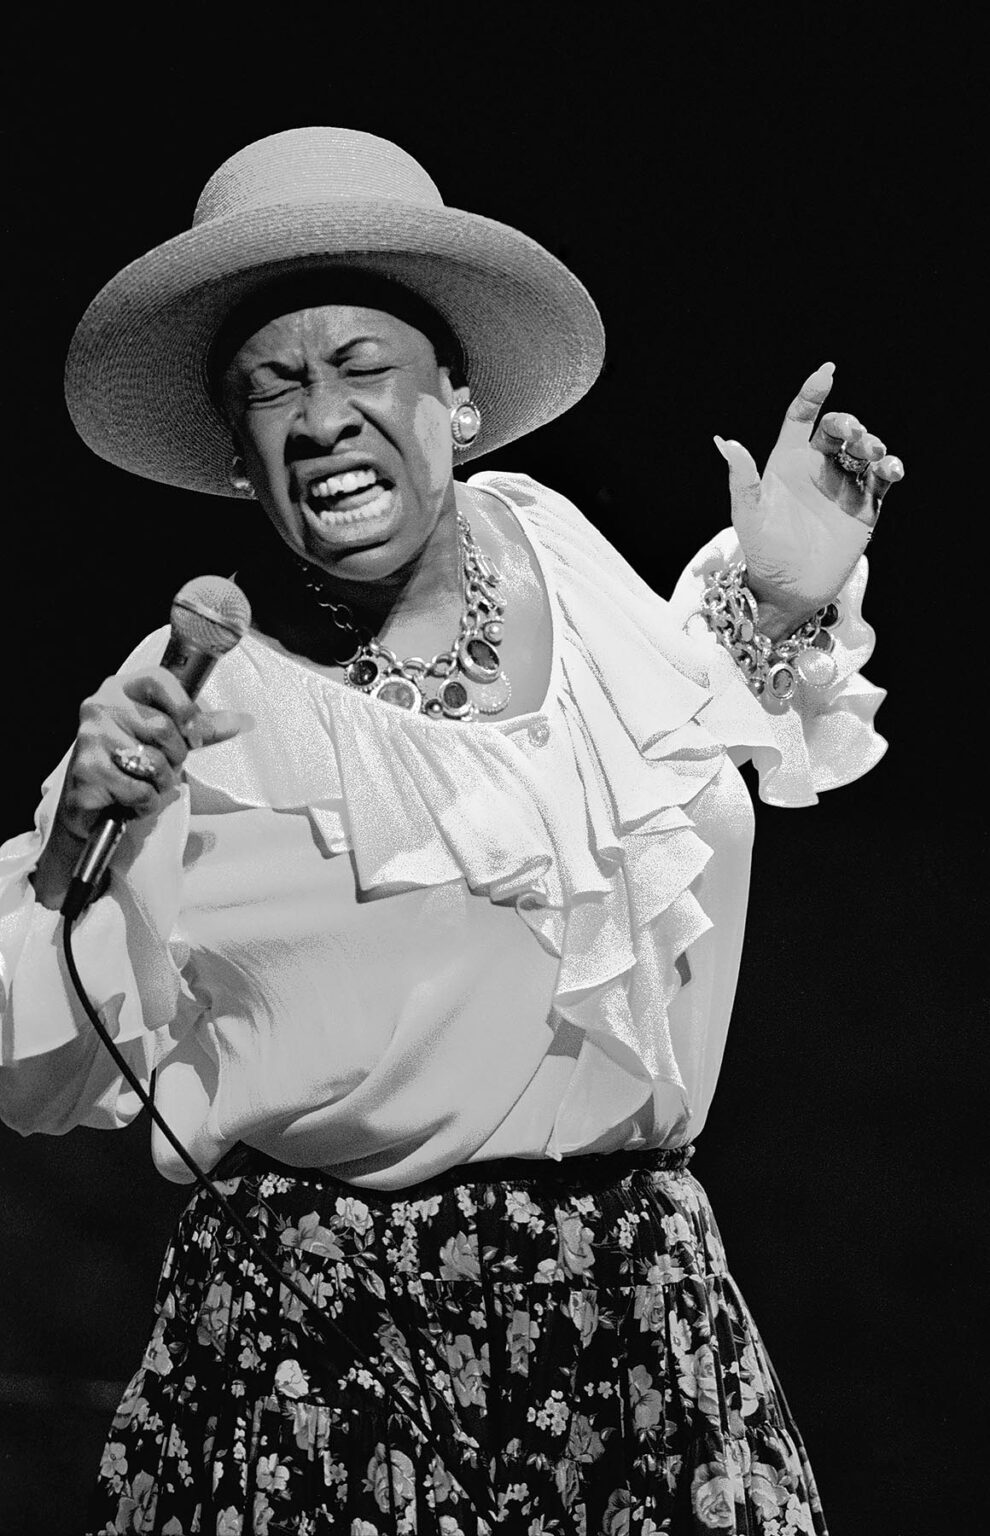 BETTY CARTER performs at the MONTEREY JAZZ FESTIVAL - MONTEREY, CALIFORNIA